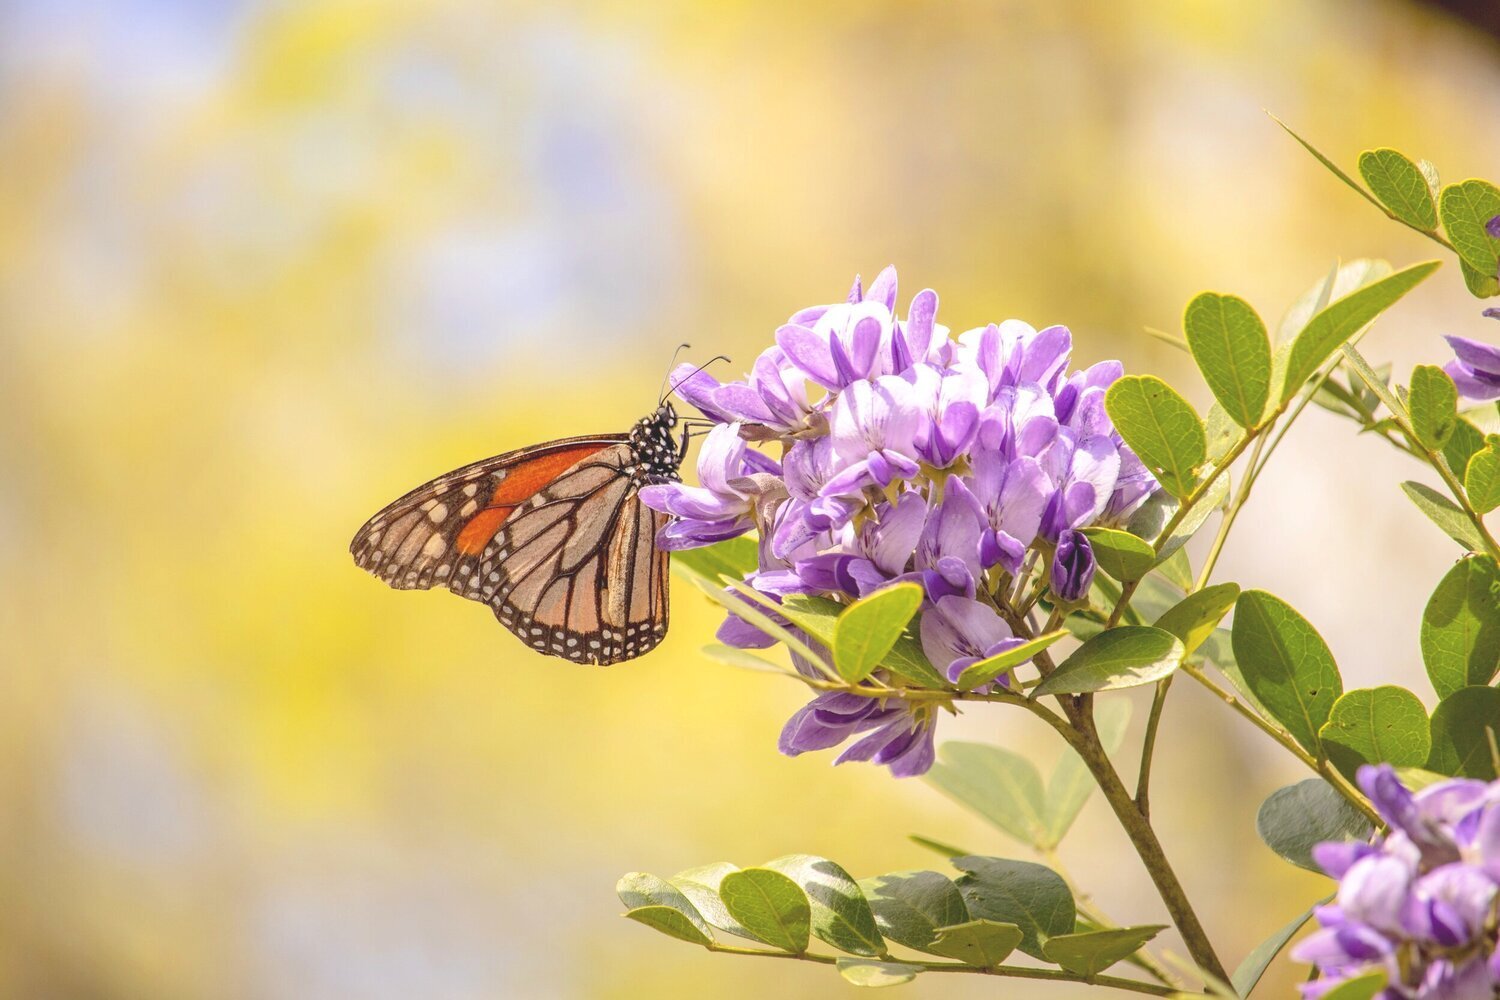 Texas Mountain Laurel with a butterfly